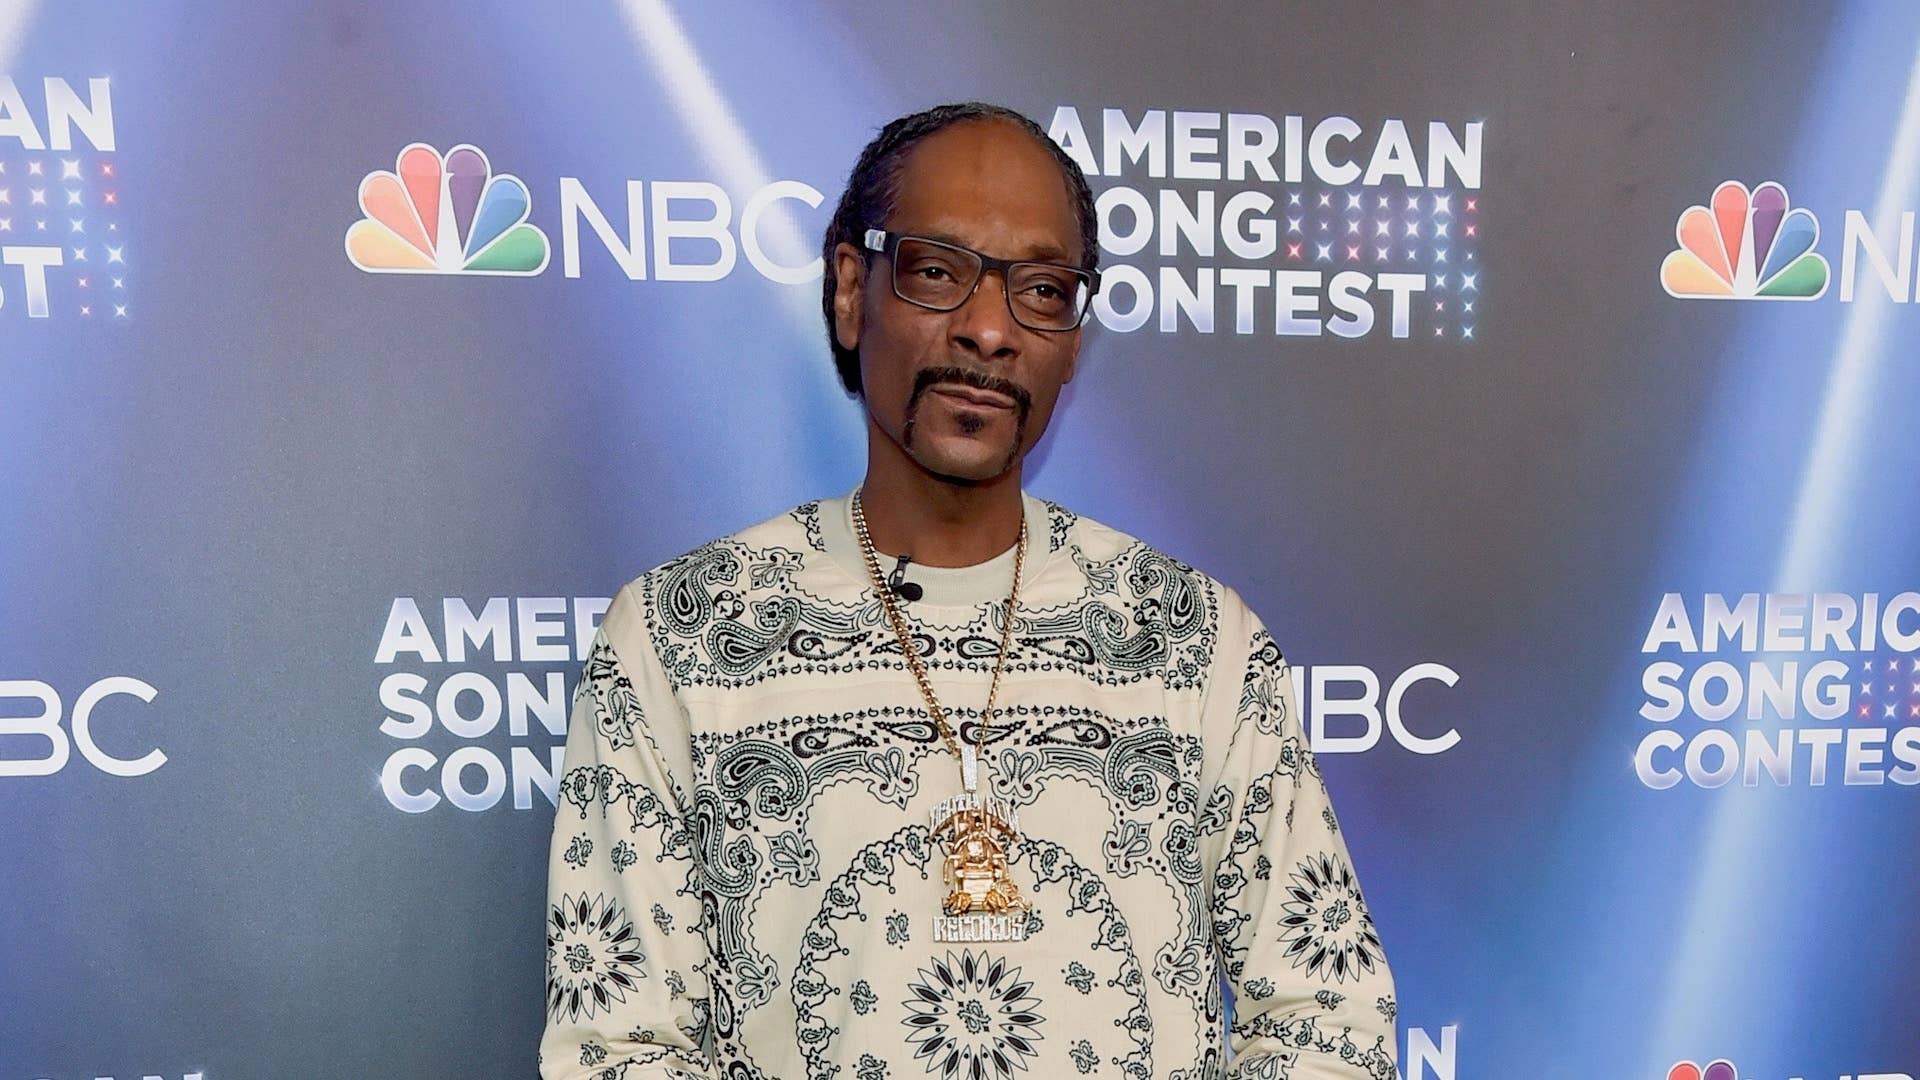 Snoop Dogg attends NBC's "American Song Contest" Week 4 at Universal Studios Hollywood